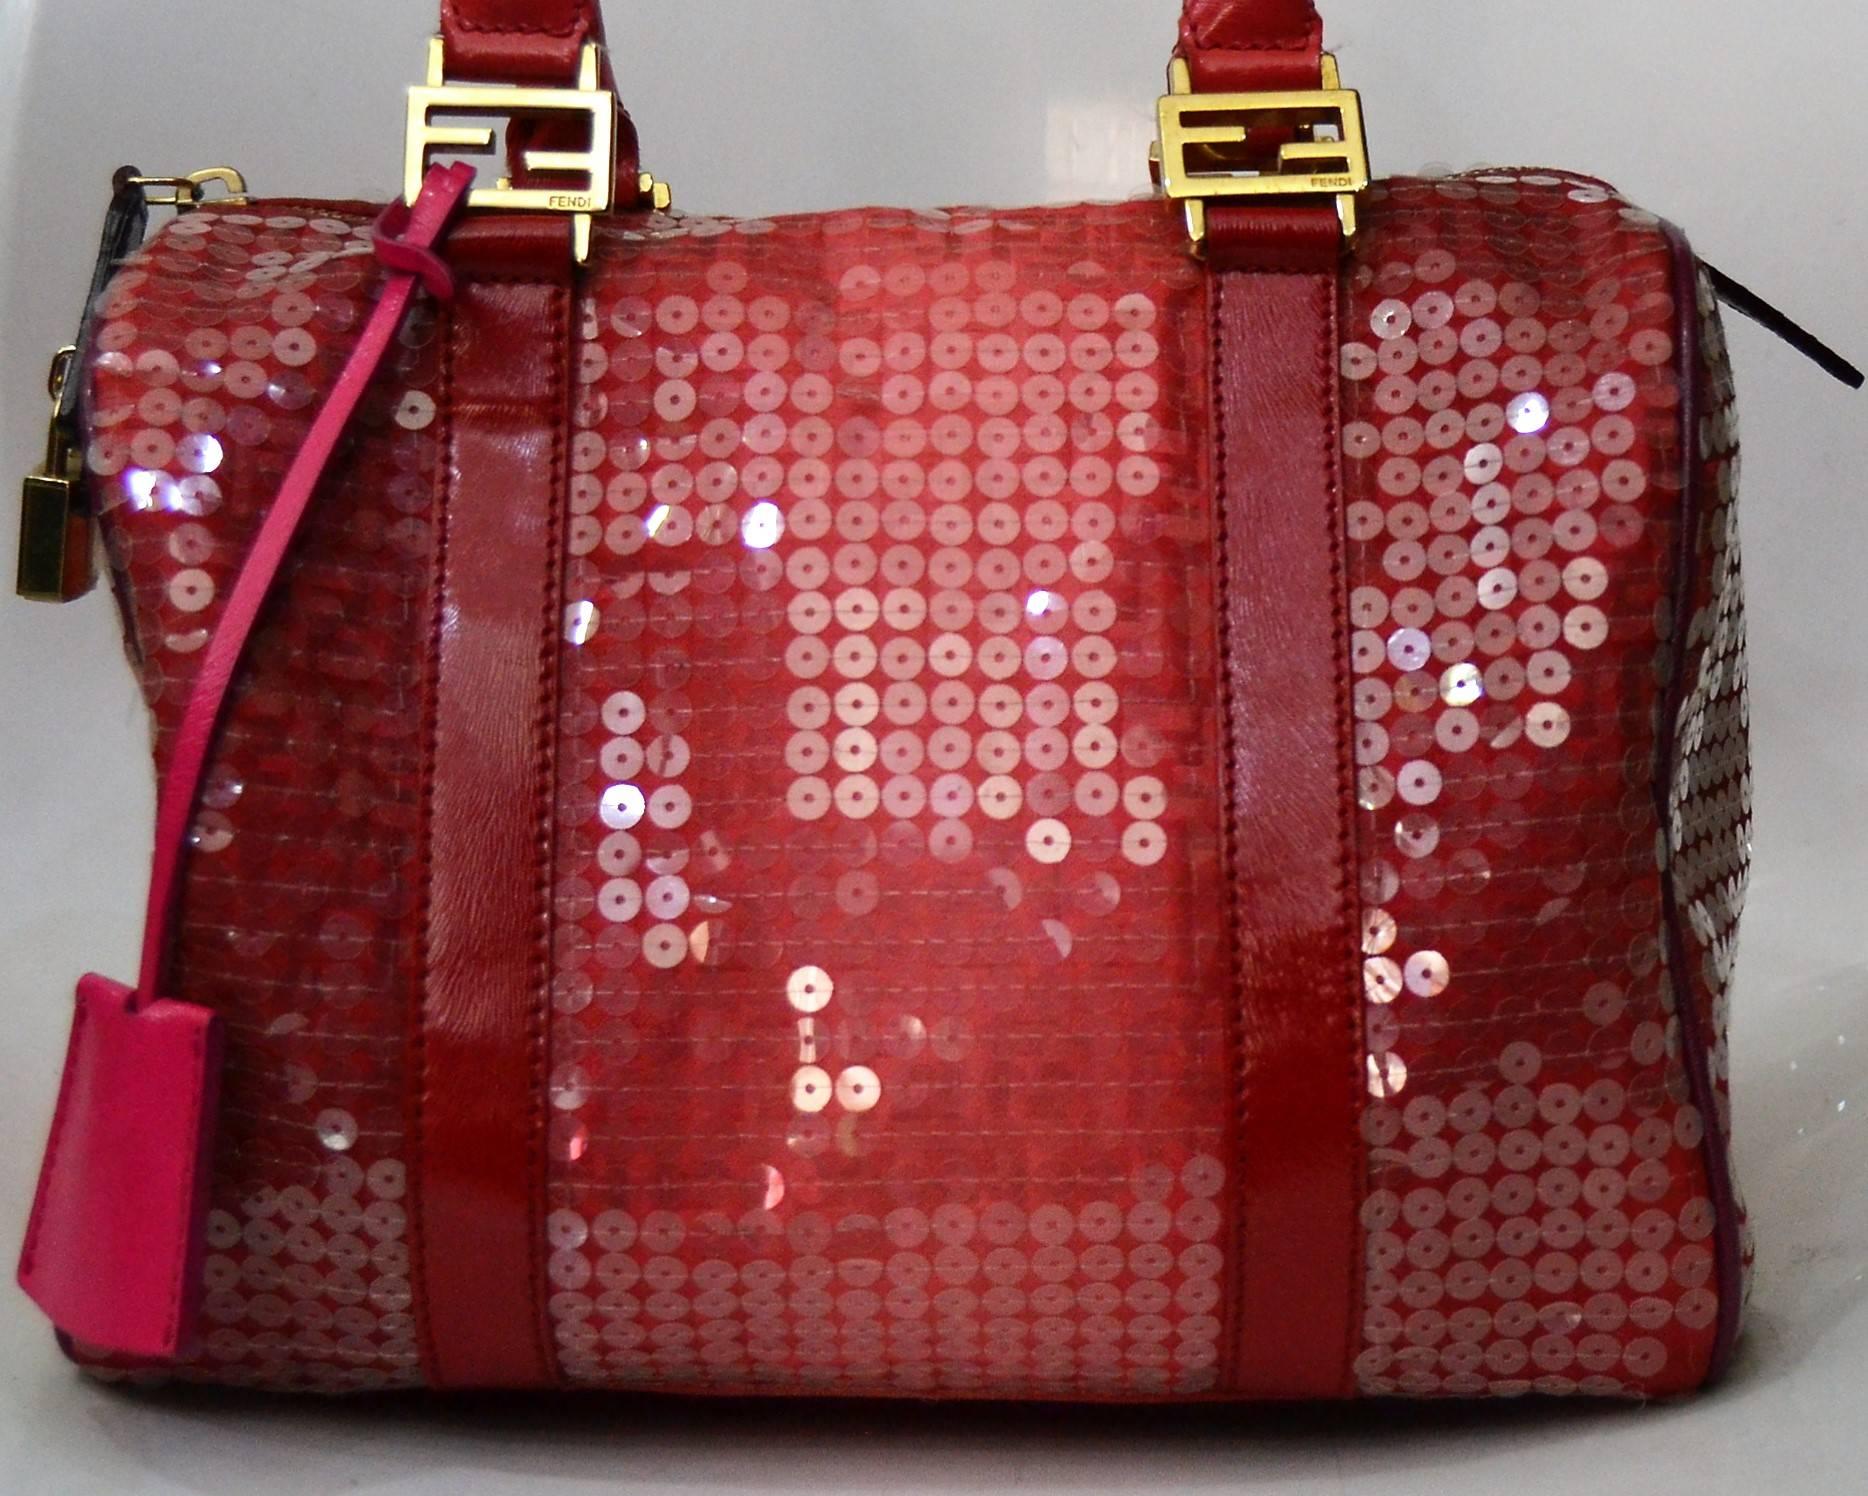 Fendi Forever Sequins Boston Bag

Fucsia bag, gold tone hardware

Total lenght with handle: 33 cm